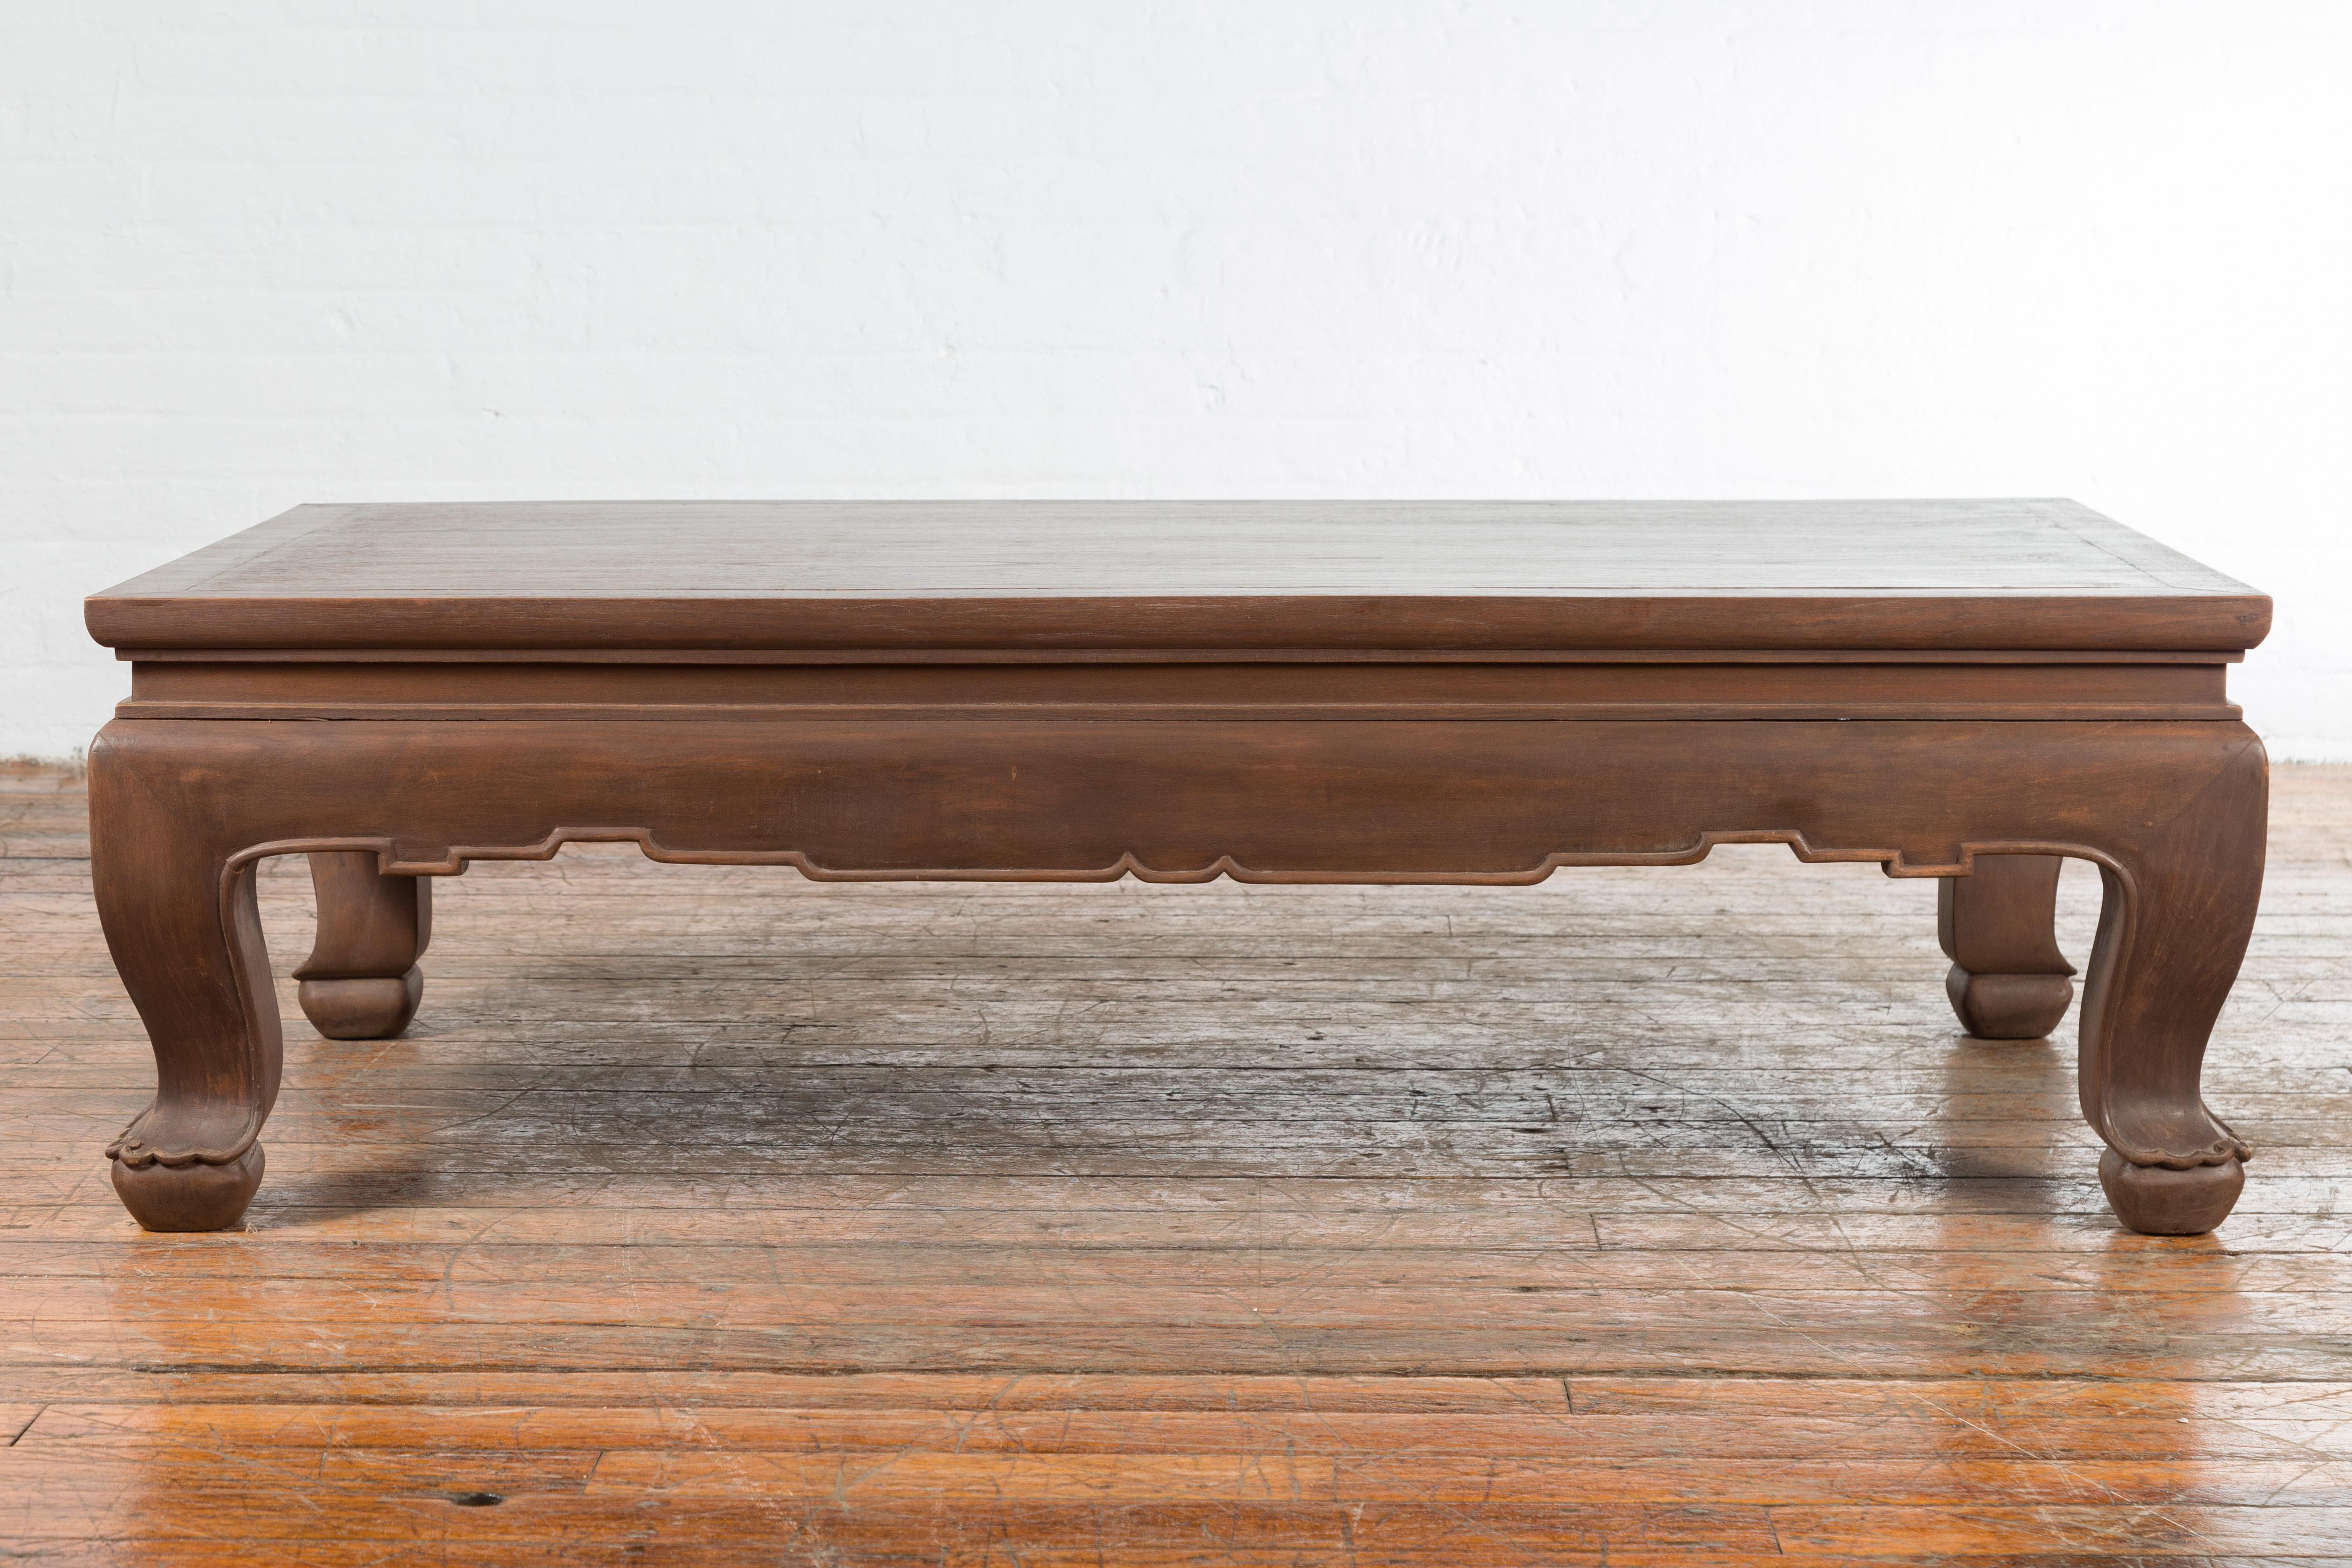 A vintage Thai wooden coffee table from the mid 20th century with waisted carved apron and chow legs. Created in Thailand during the midcentury period, this wooden coffee table features a rectangular top sitting above a waisted carved apron. The